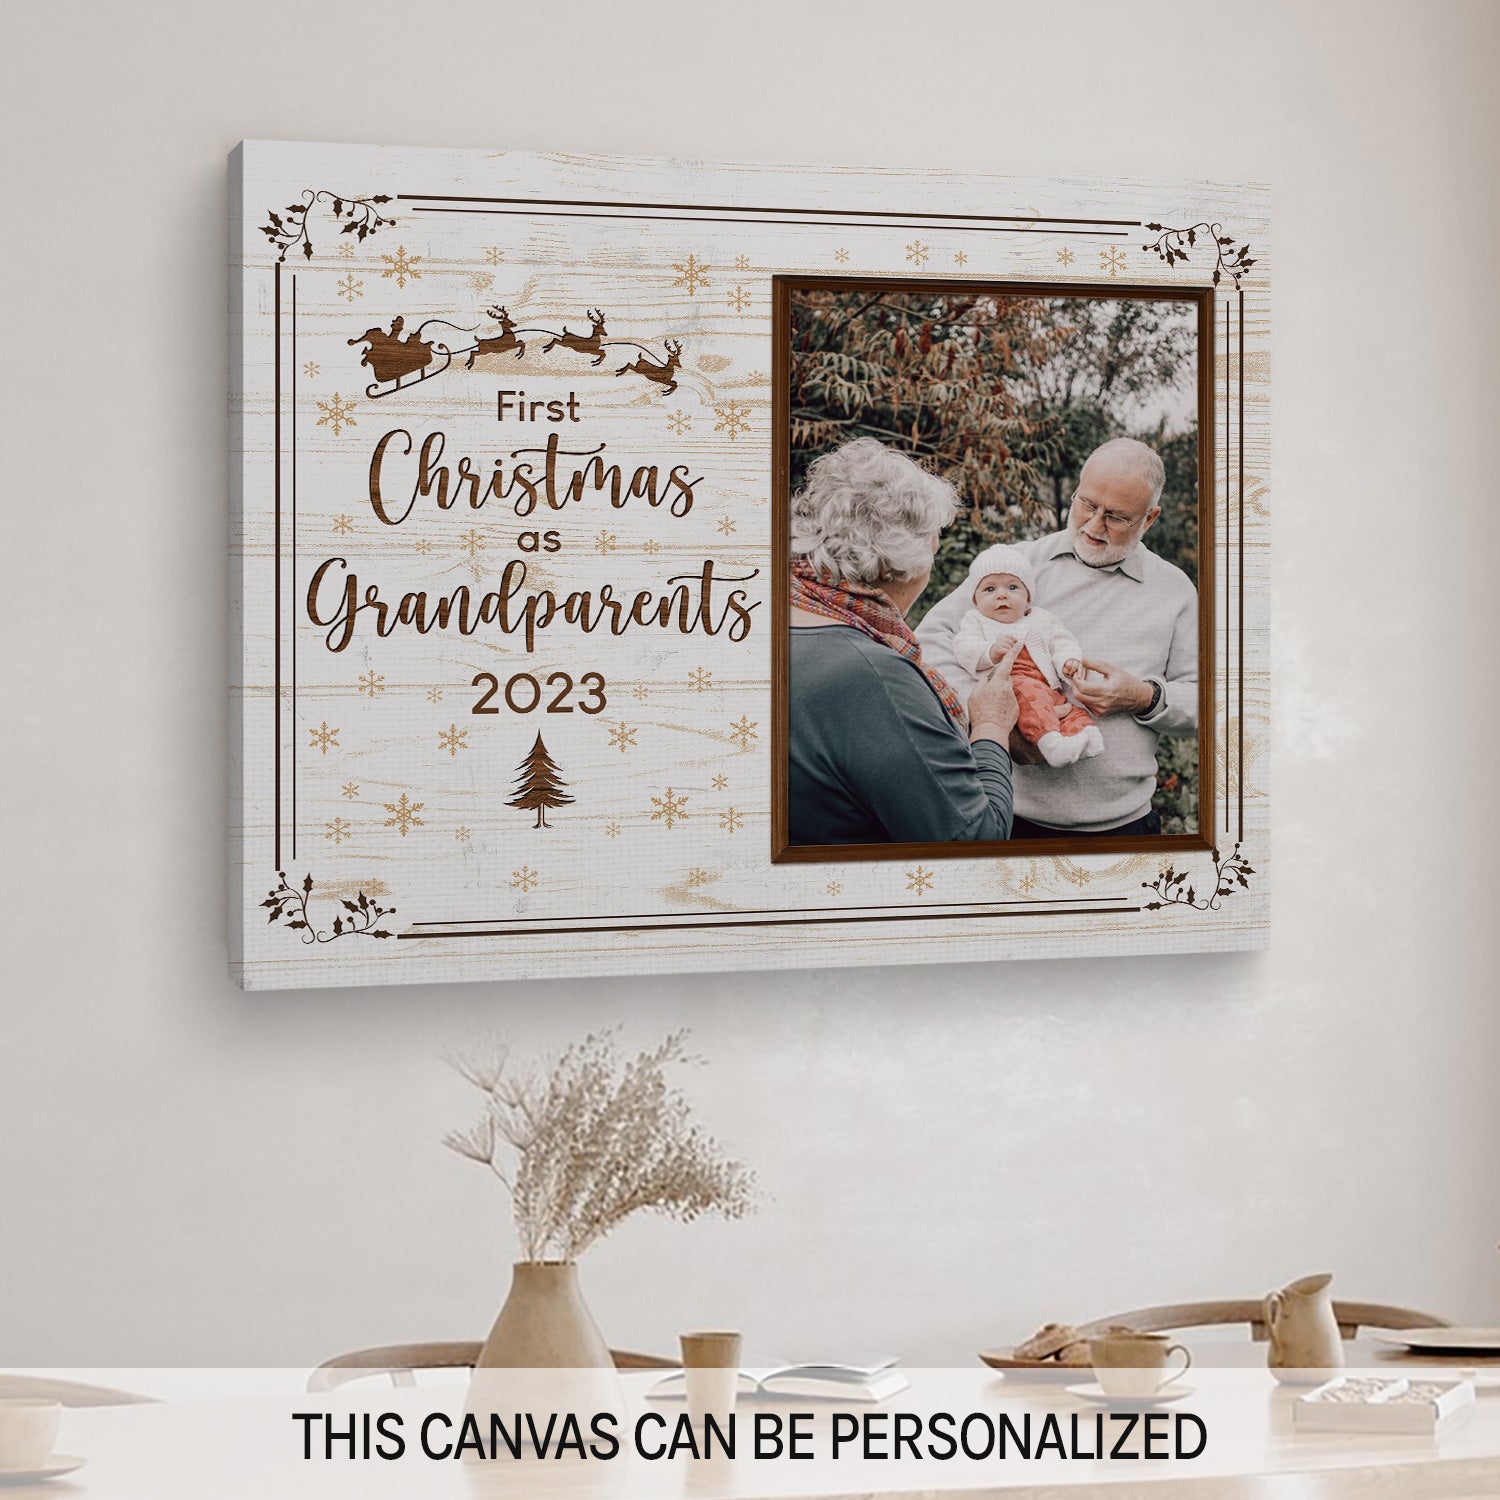 First Christmas as Grandparents - Personalized First Christmas gift for Grandparents - Custom Canvas Print - MyMindfulGifts